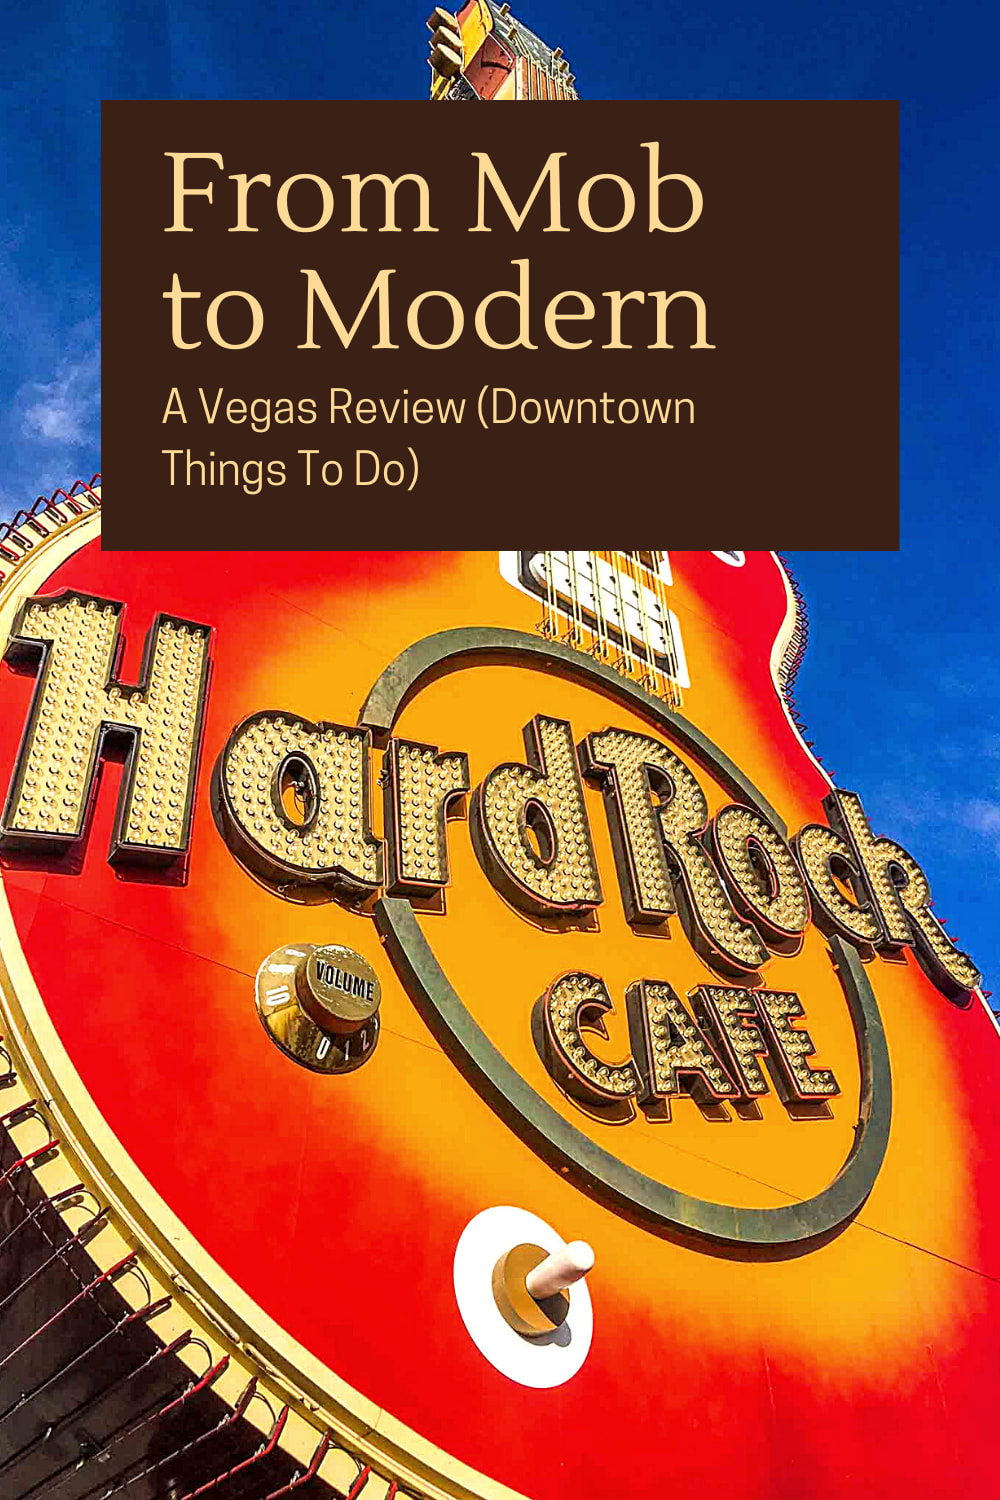 From Mob to Modern: A Vegas Review (Downtown)